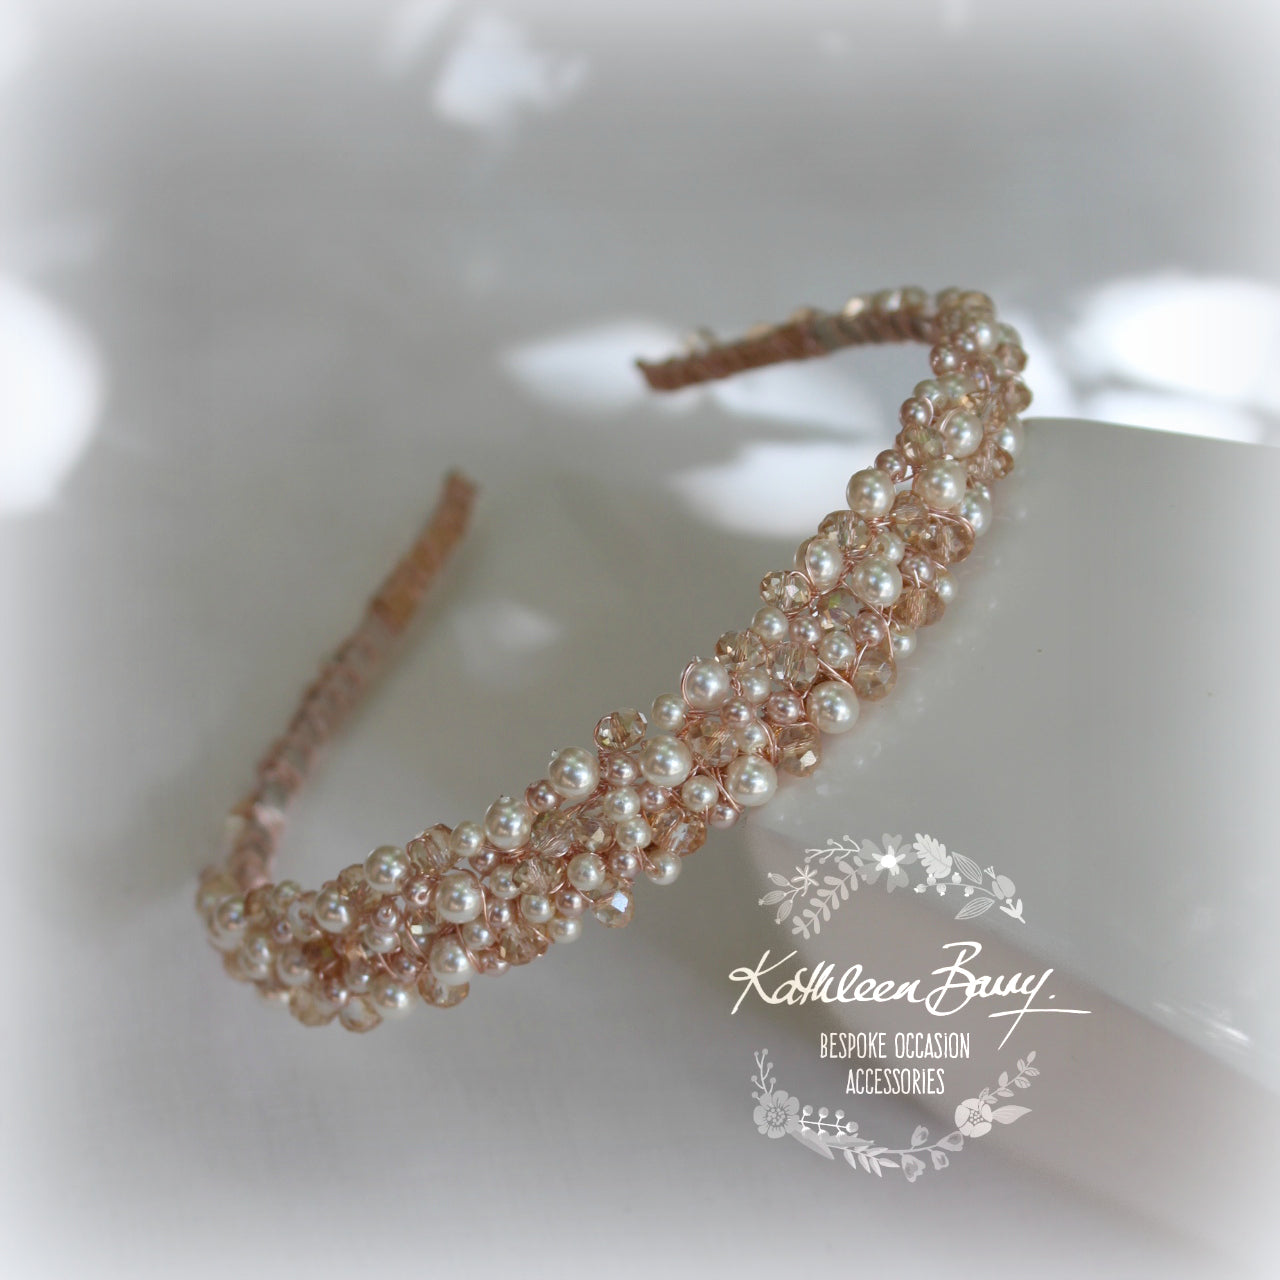 Tasneen headband Tiara - Rose gold, mixed pearls and champagne crystals - Custom options available